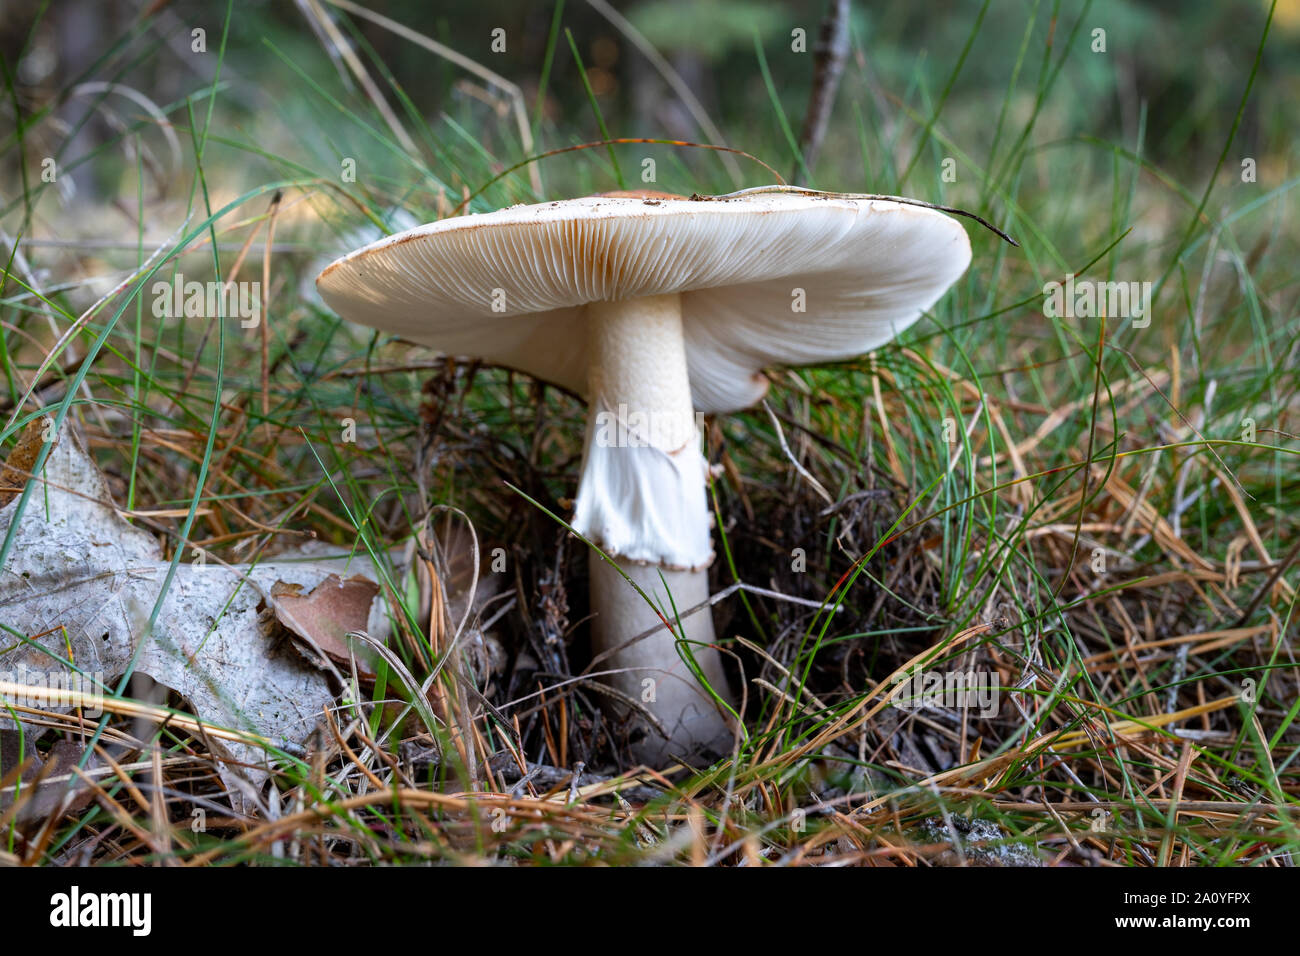 Poisonous mushroom growing in the forest. Inedible mushrooms growing in Central Europe. Autumn season. Stock Photo